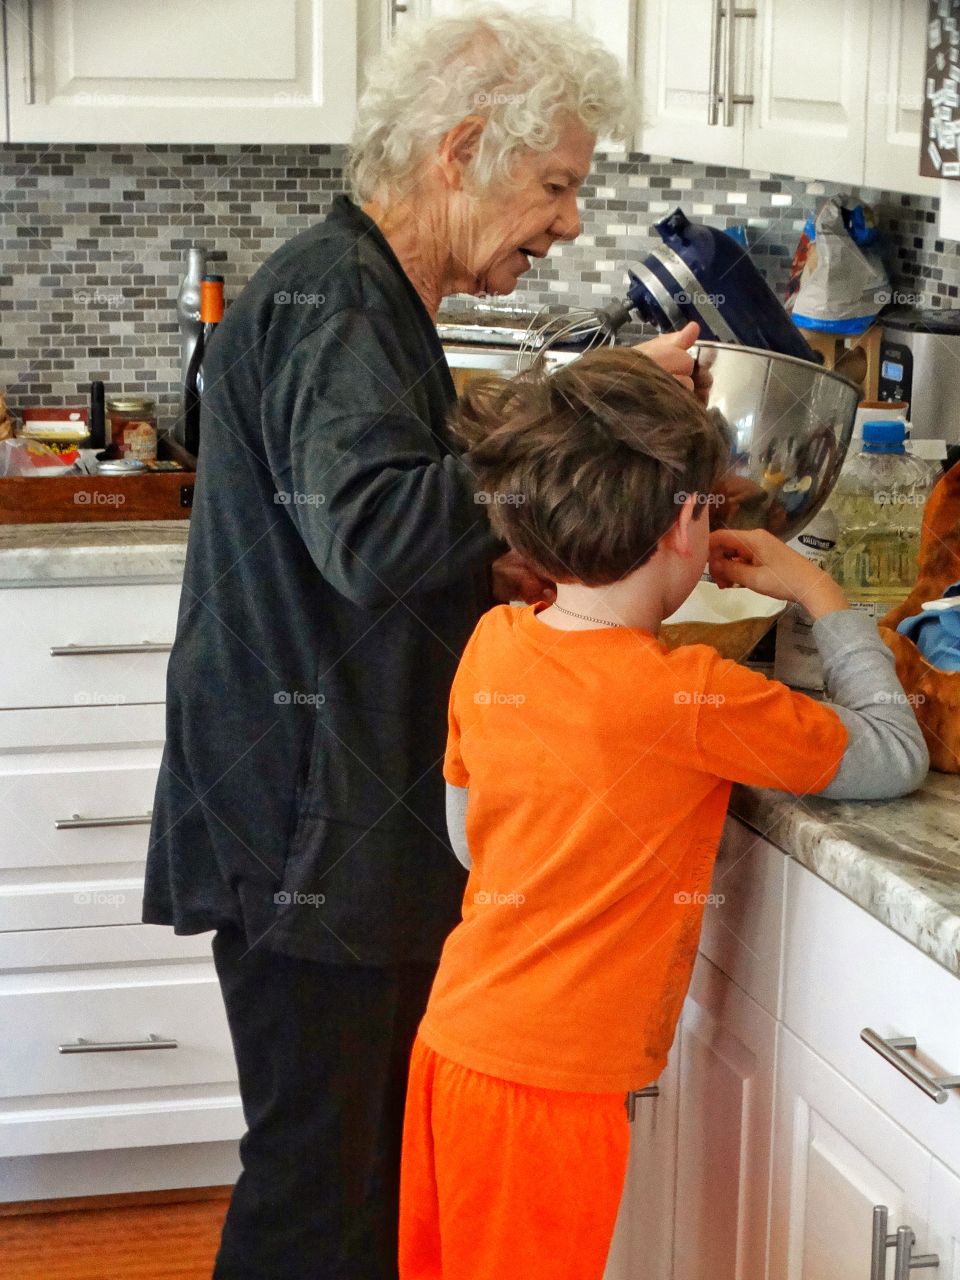 In The Kitchen With Grandma